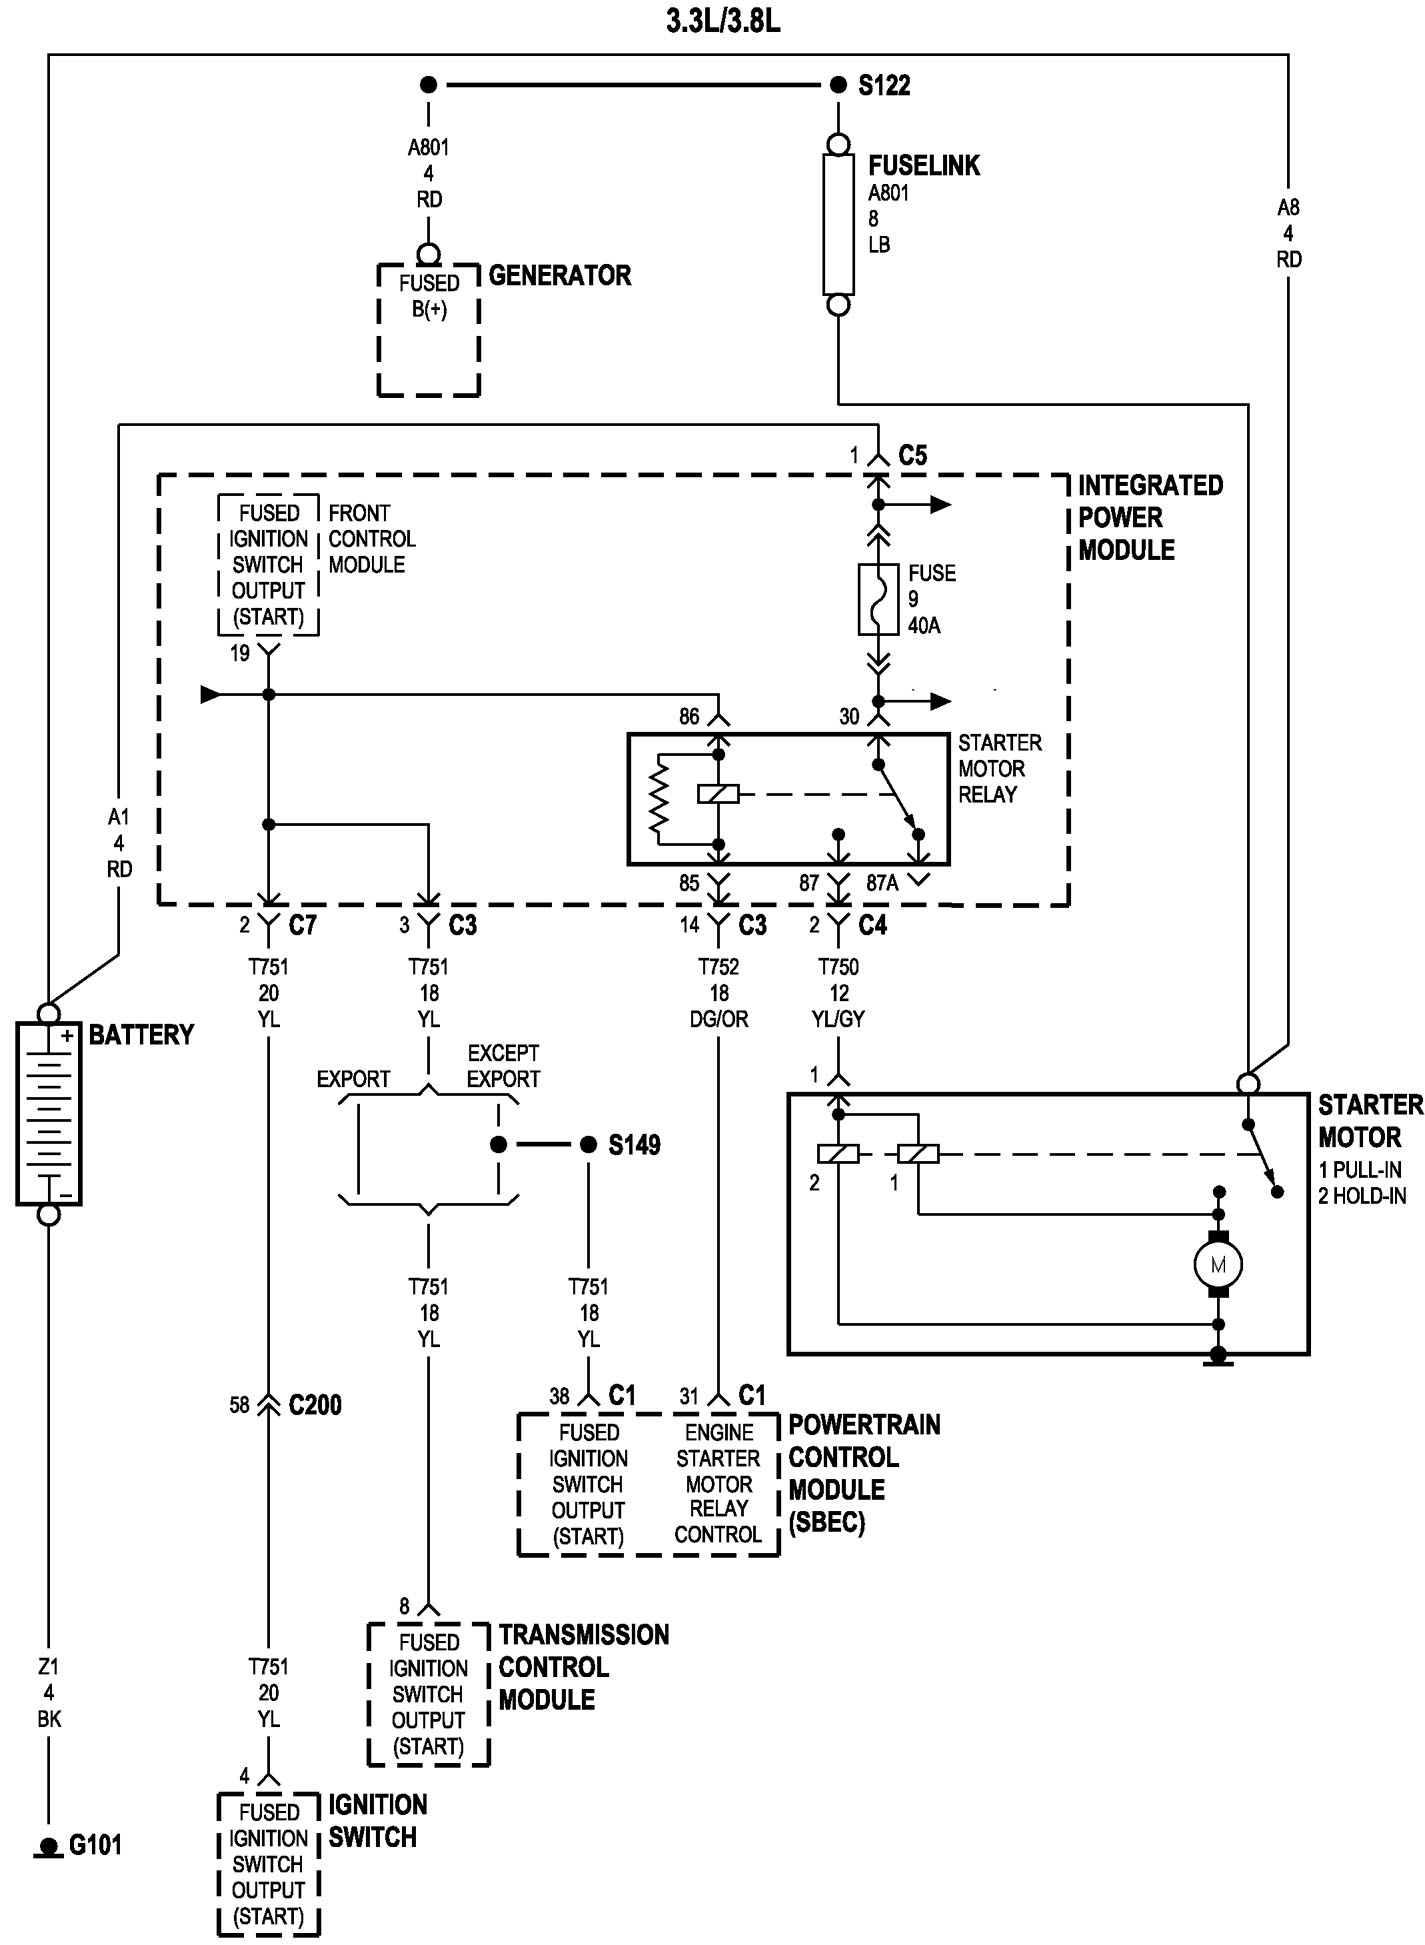 whats the wiring diagram on a 2002 chrysler voyager minivan